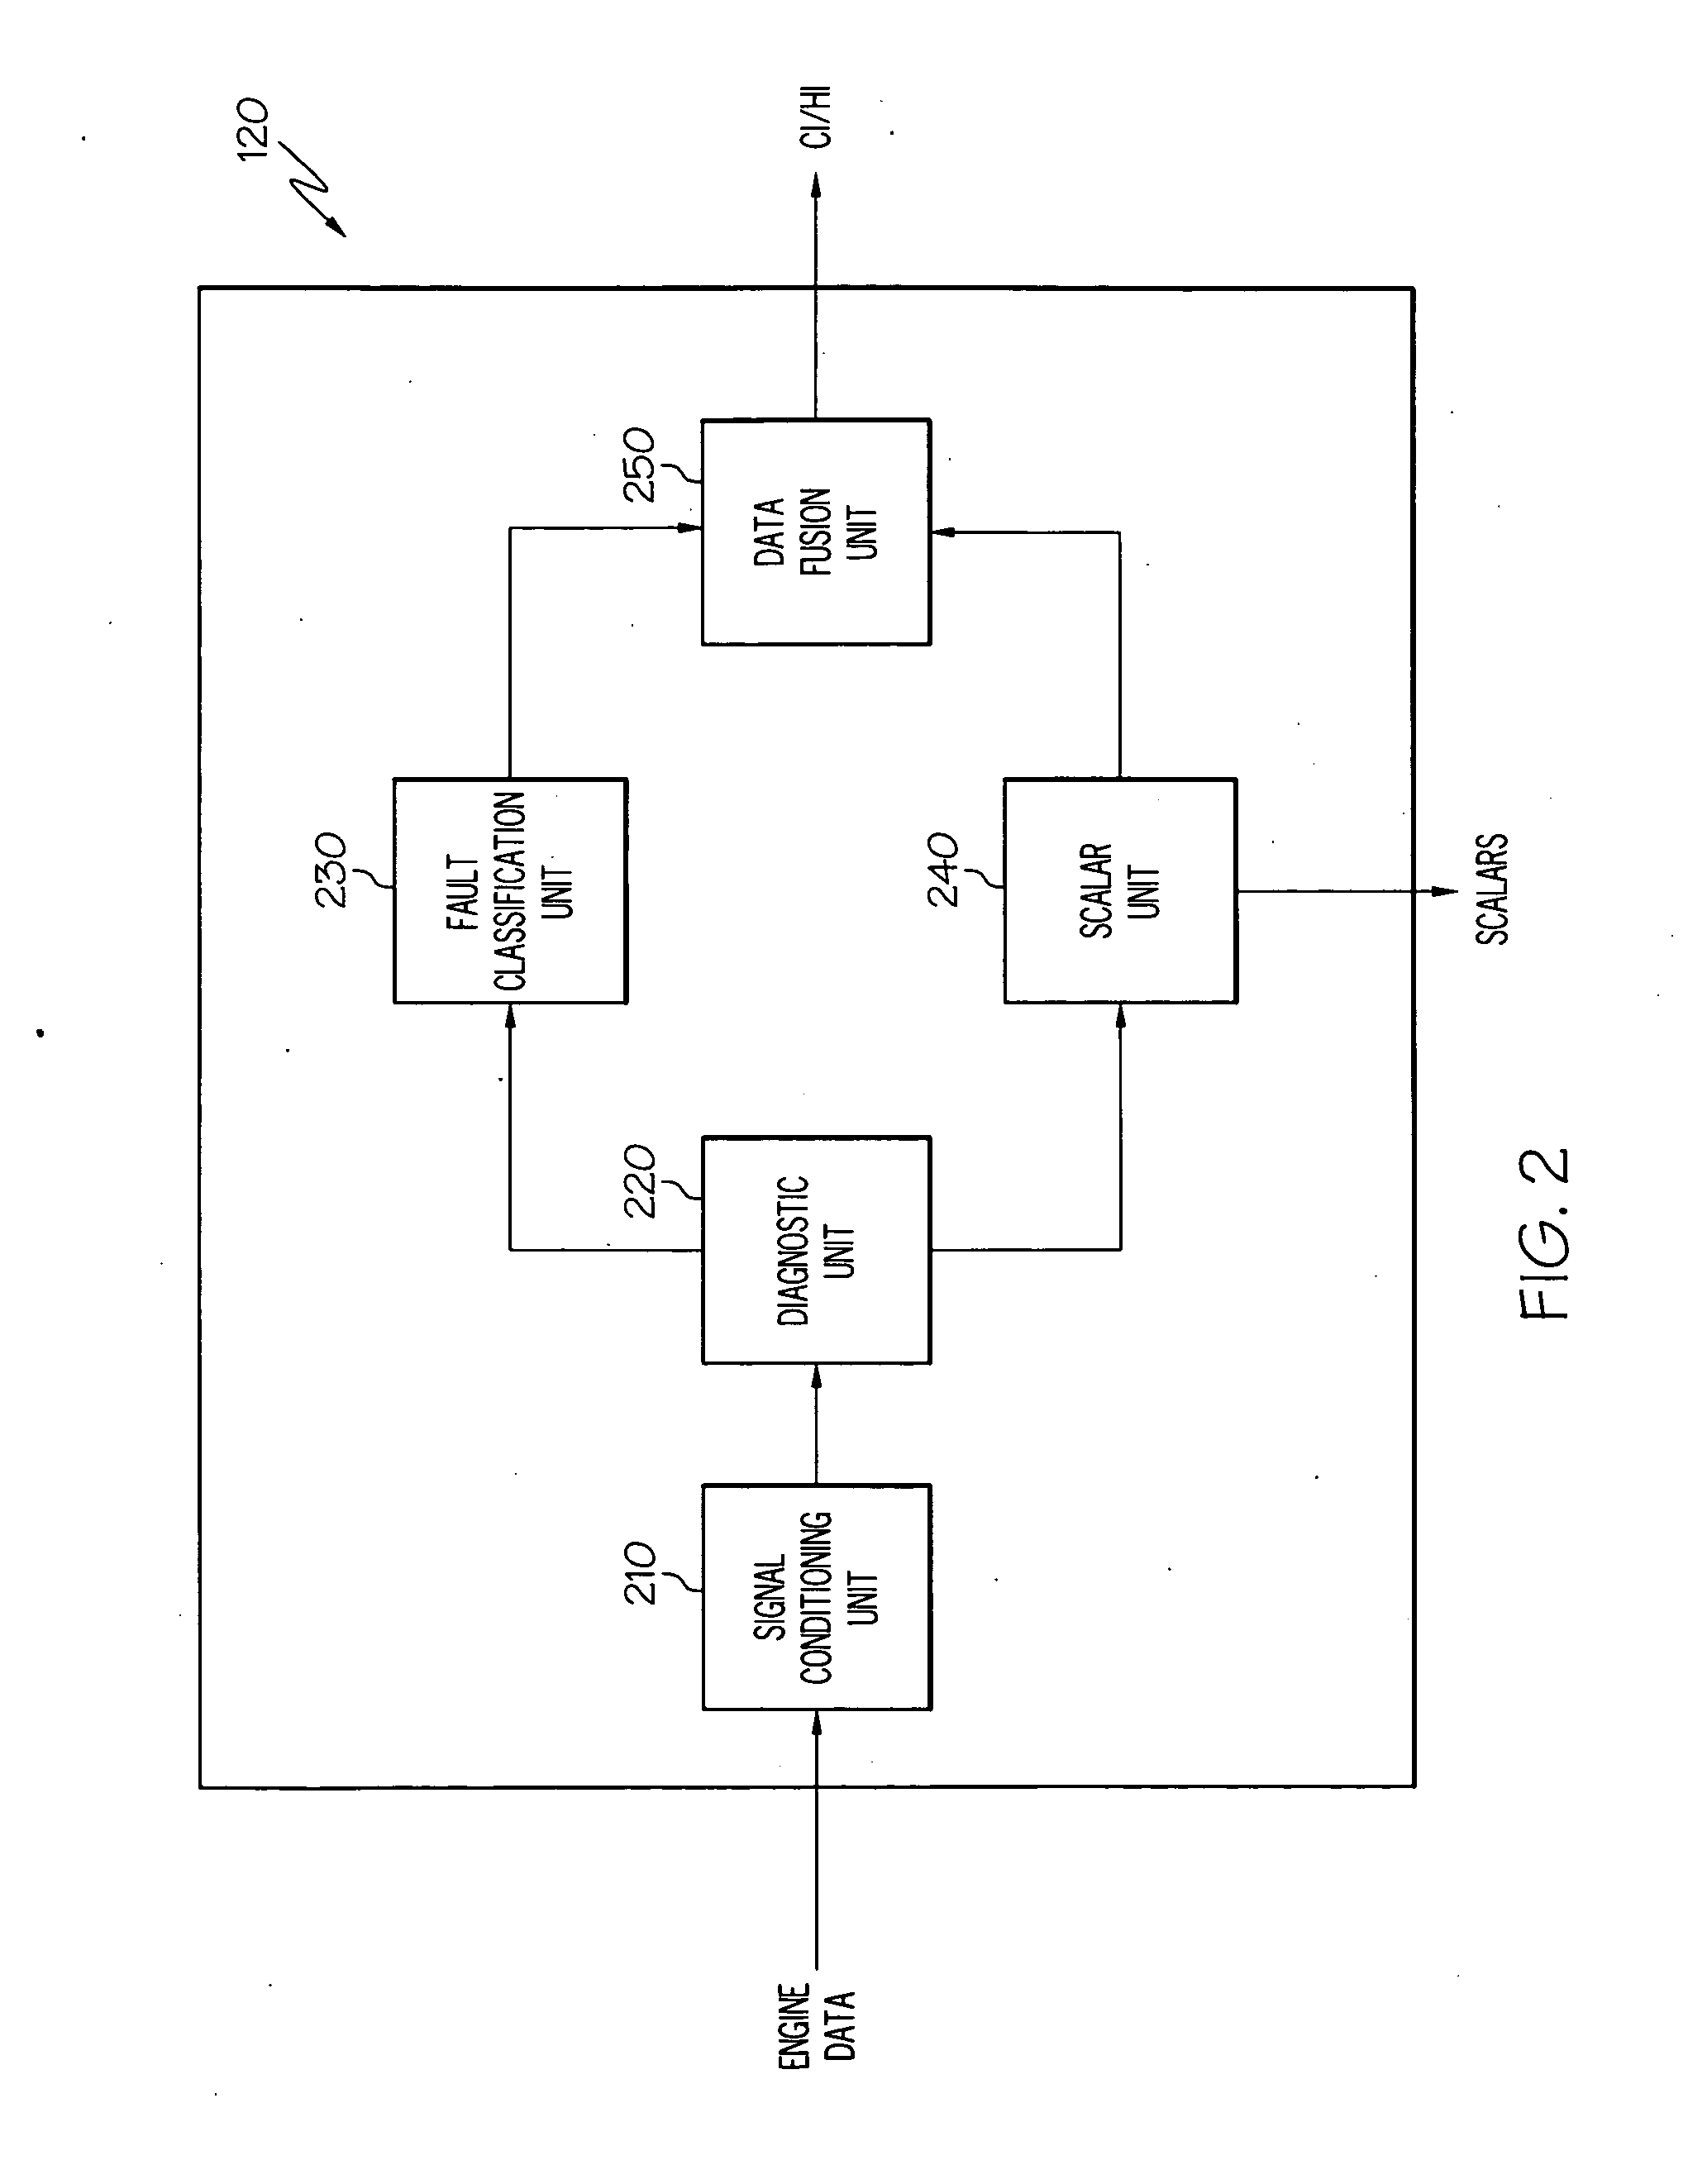 Operations support systems and methods with power management